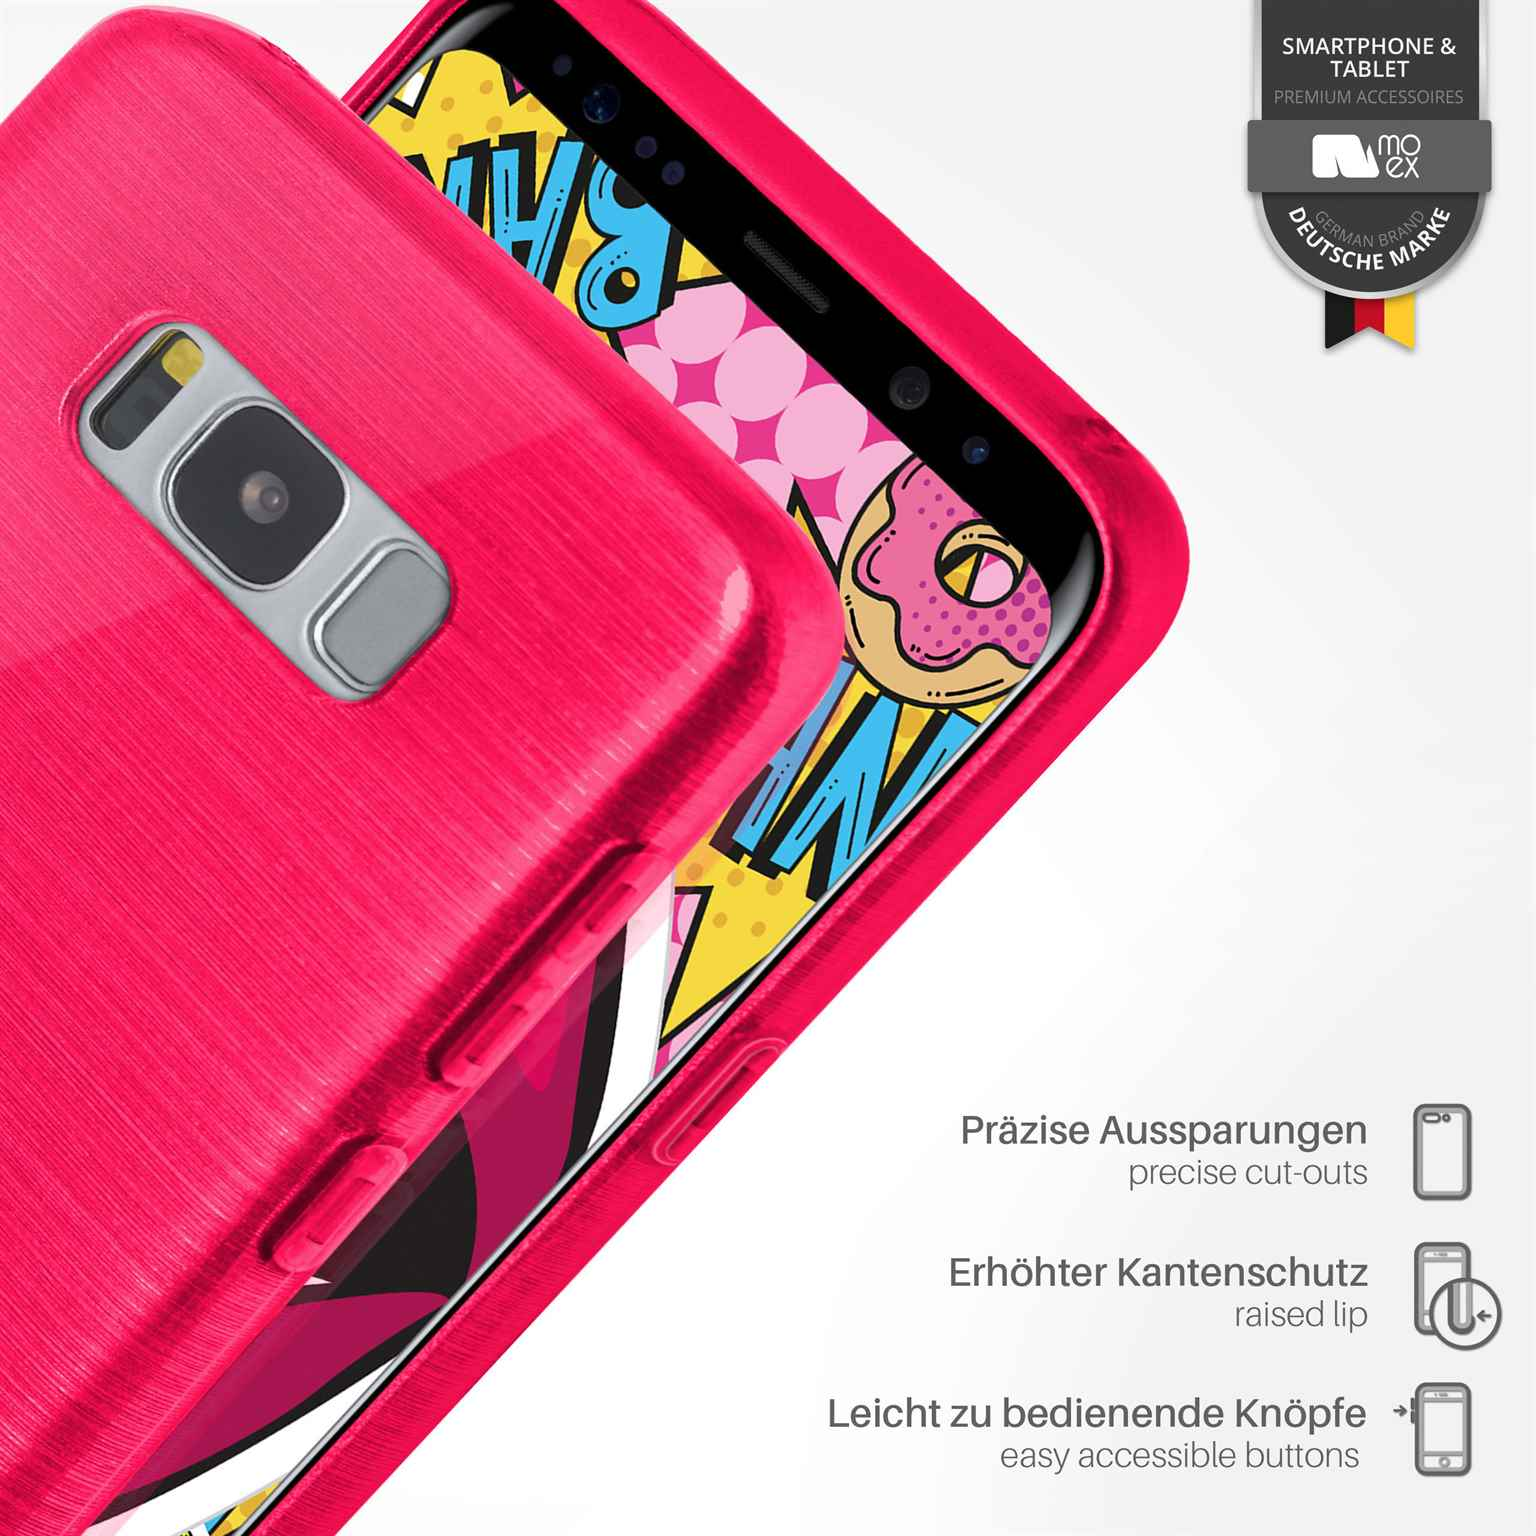 Backcover, S8, Magenta-Pink Brushed MOEX Samsung, Case, Galaxy